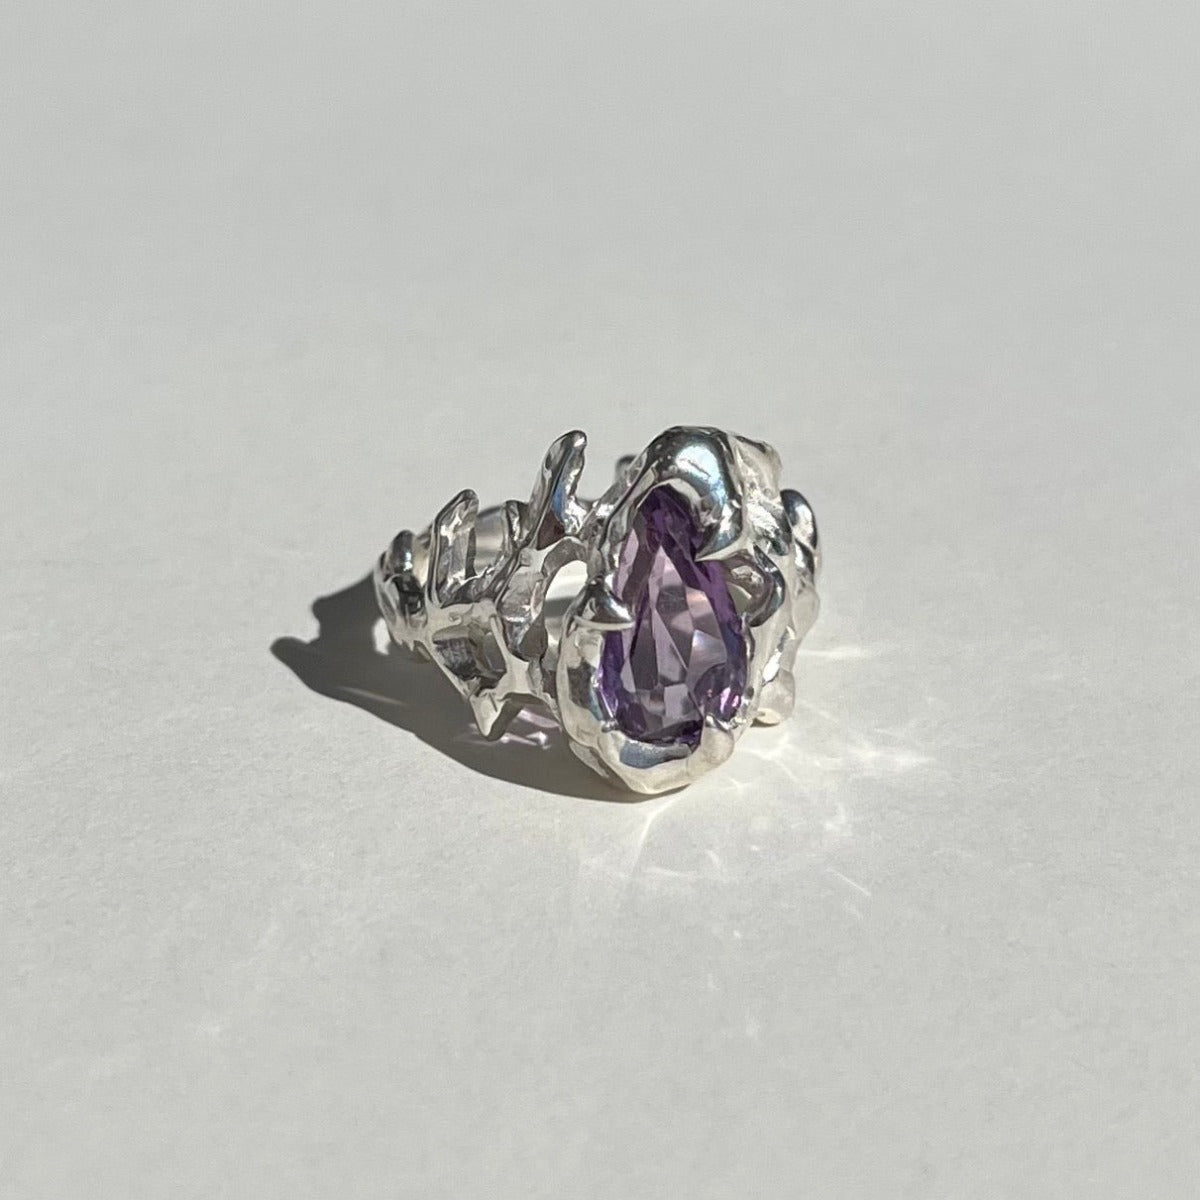  KHAOS sterling silver and Amethyst ring III